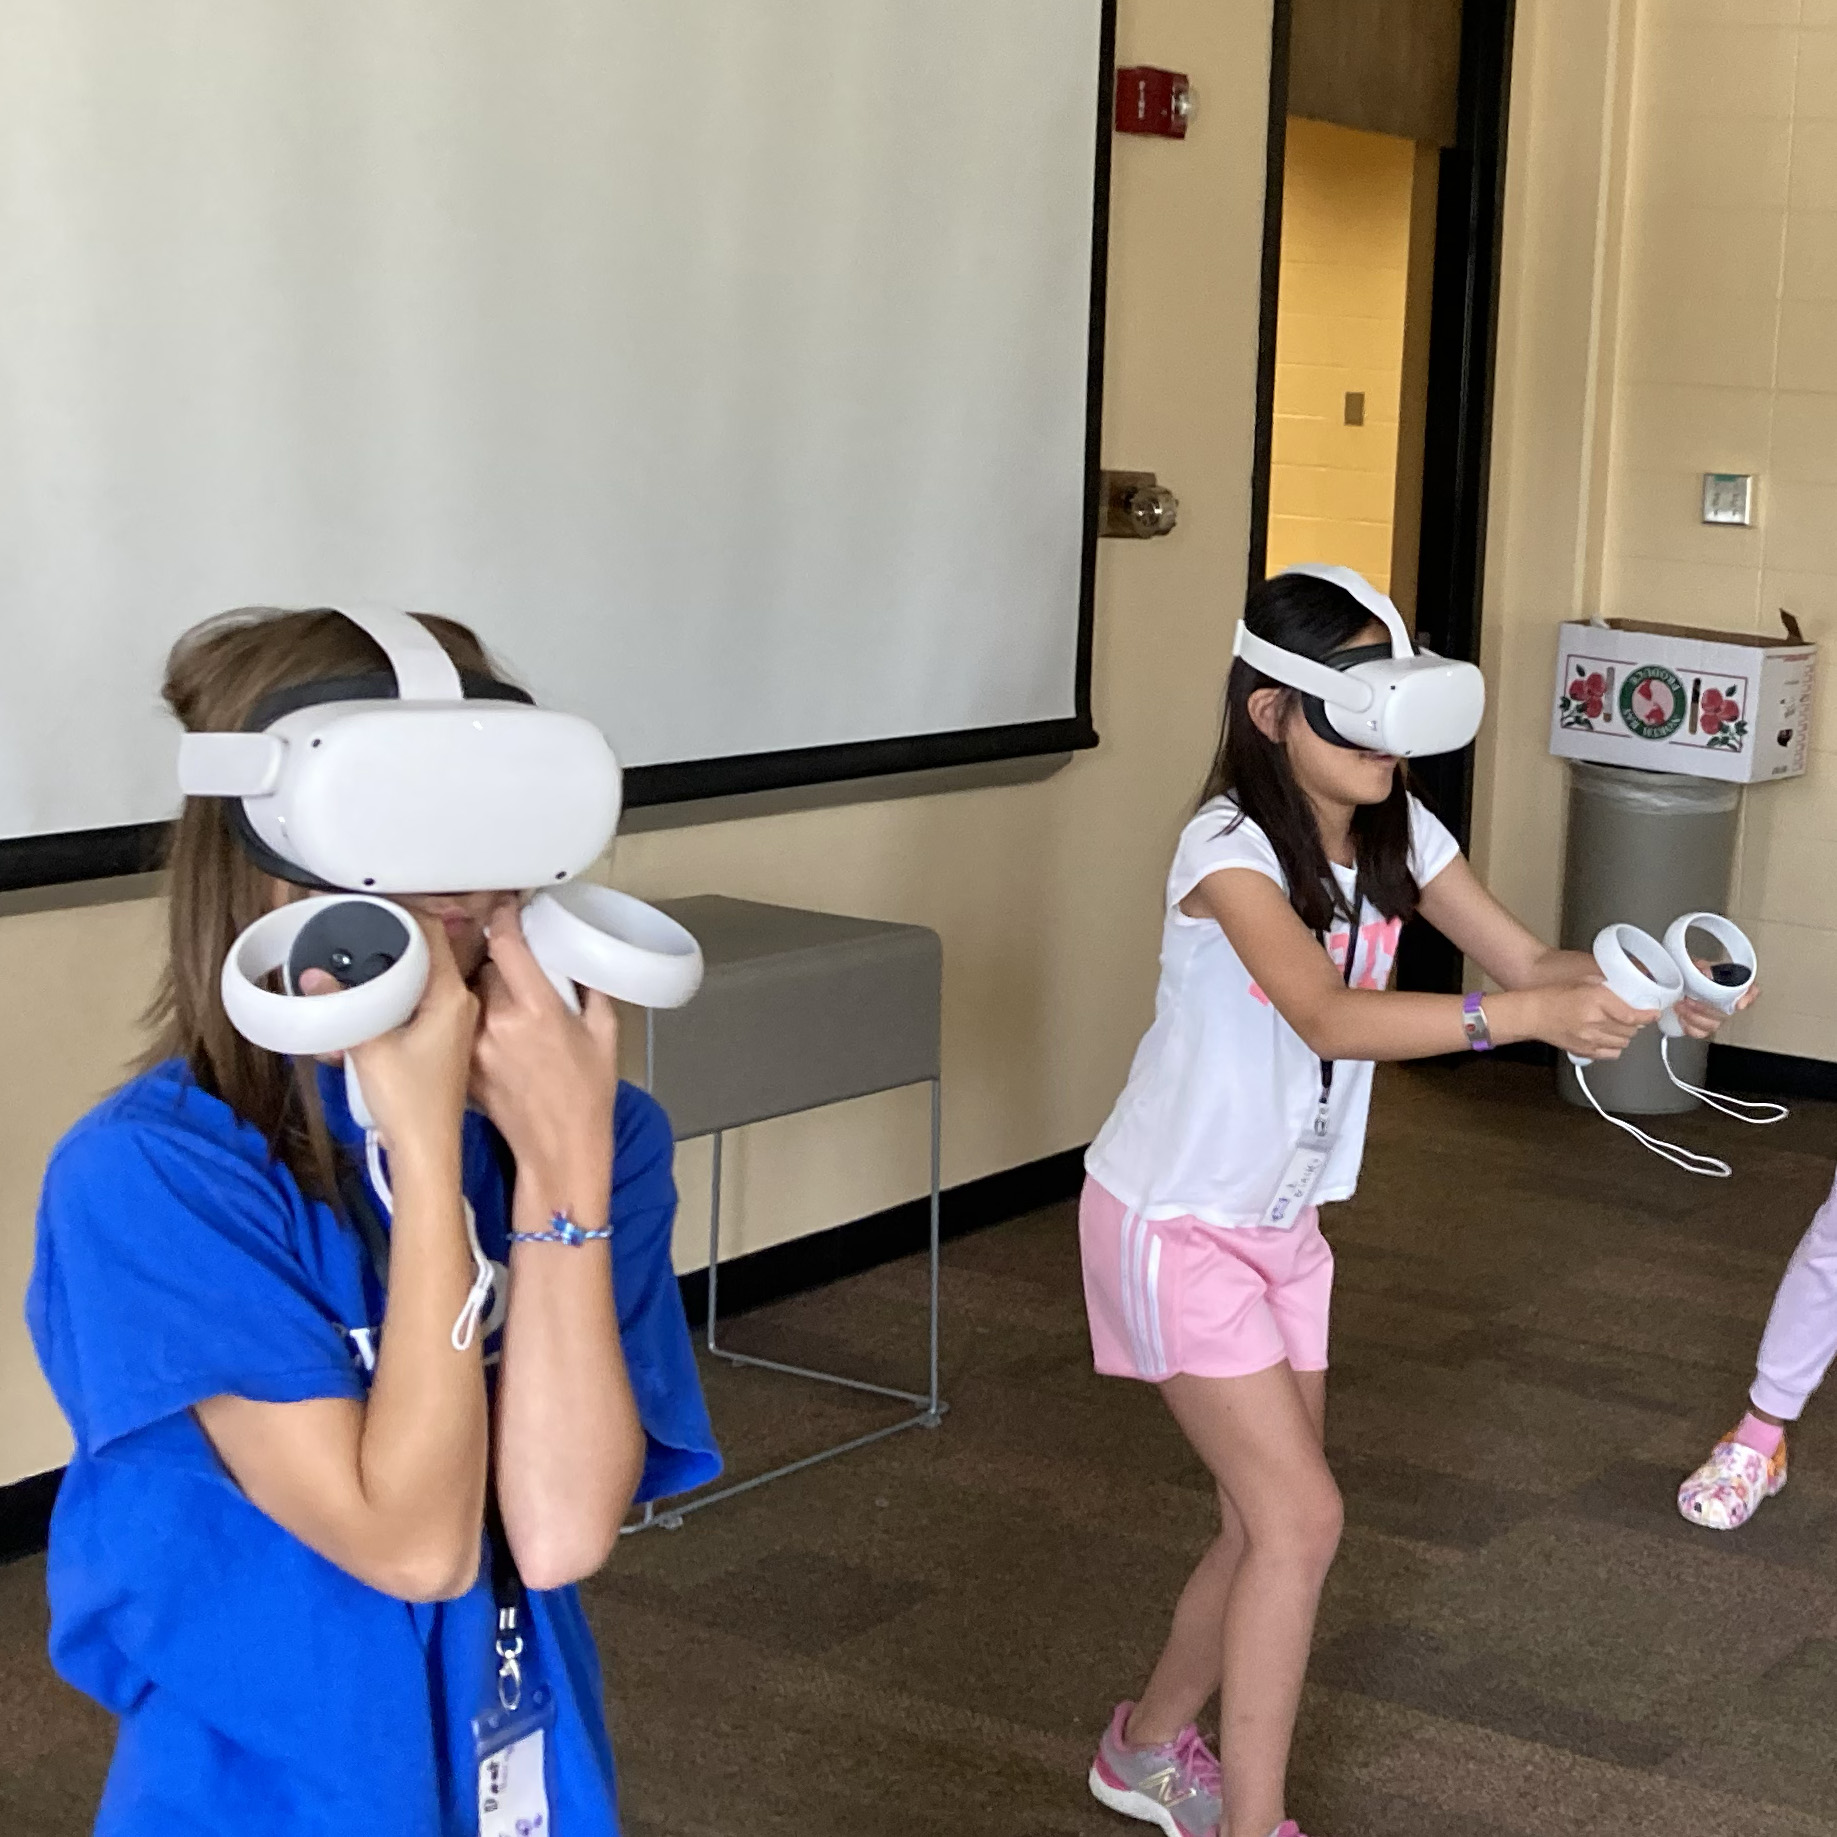 STEAM Studio campers playing a game with VR headsets